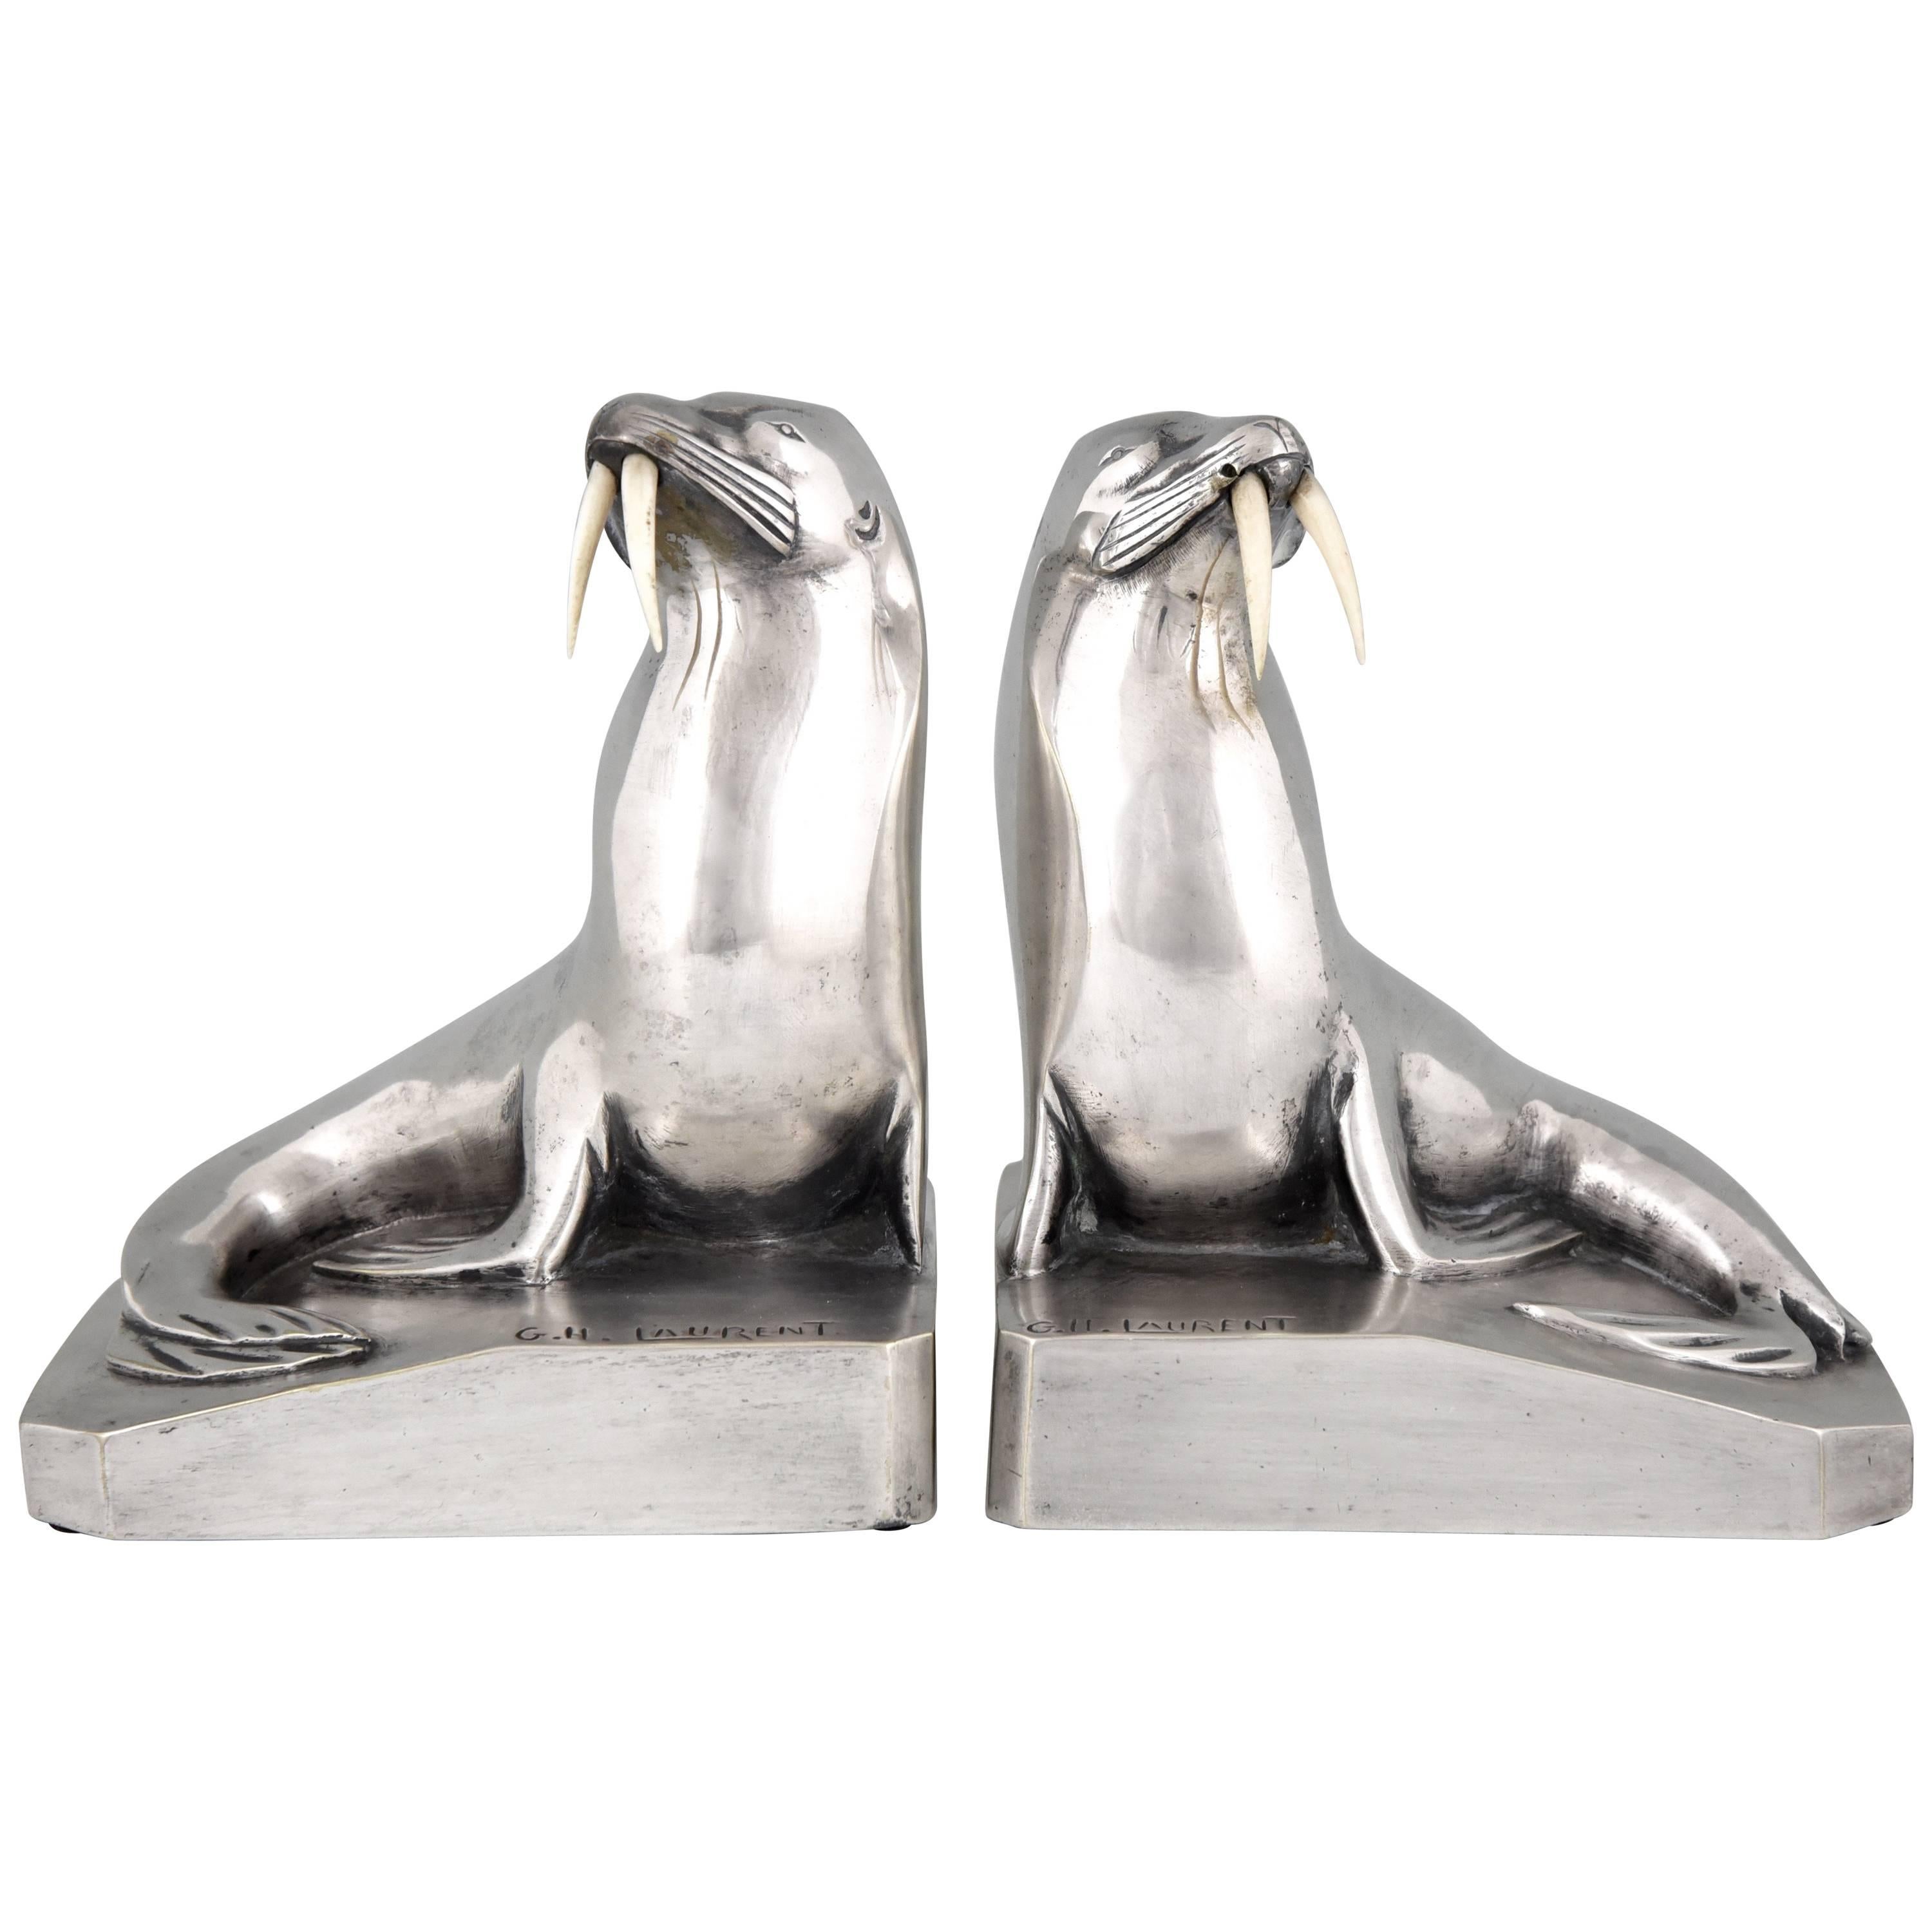 Art Deco Silvered Bronze Walrus Bookends by G. H. Laurent France